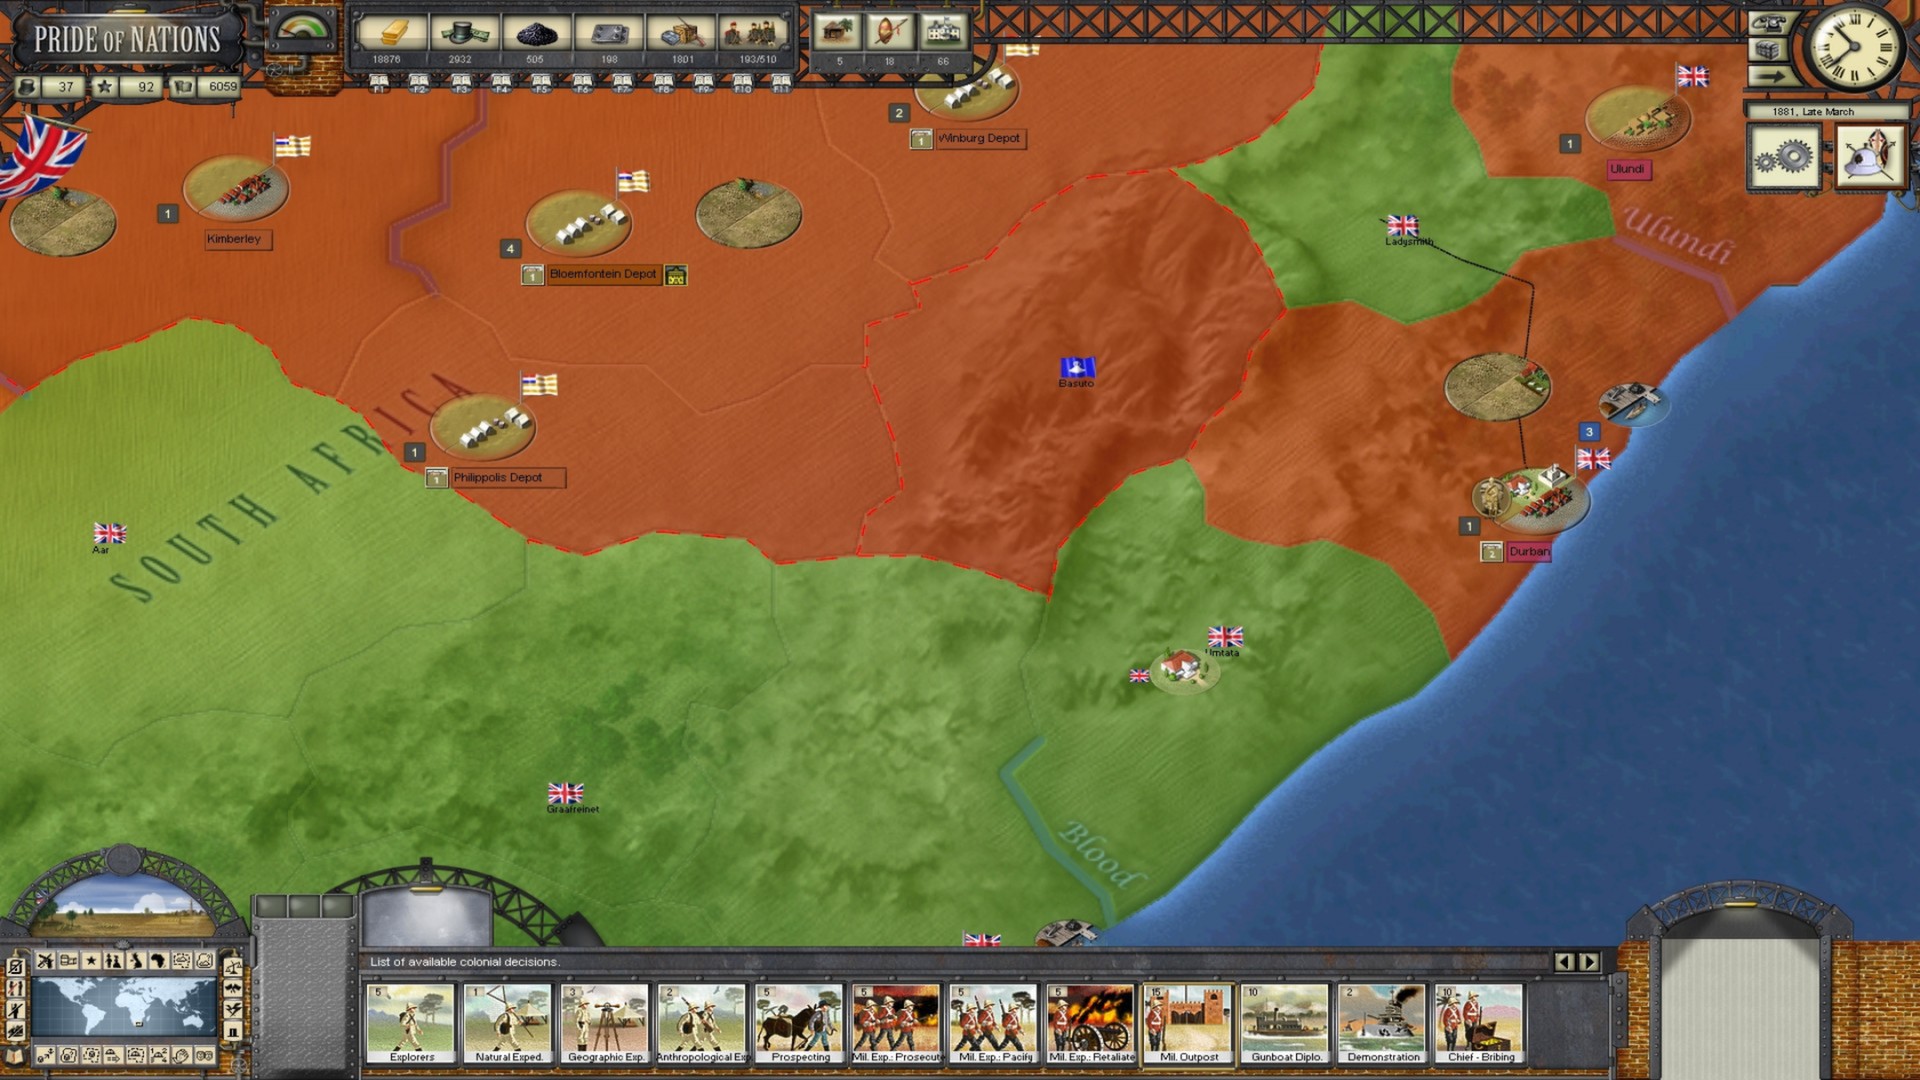 Pride Of Nations - The Scramble For Africa DLC Steam CD Key